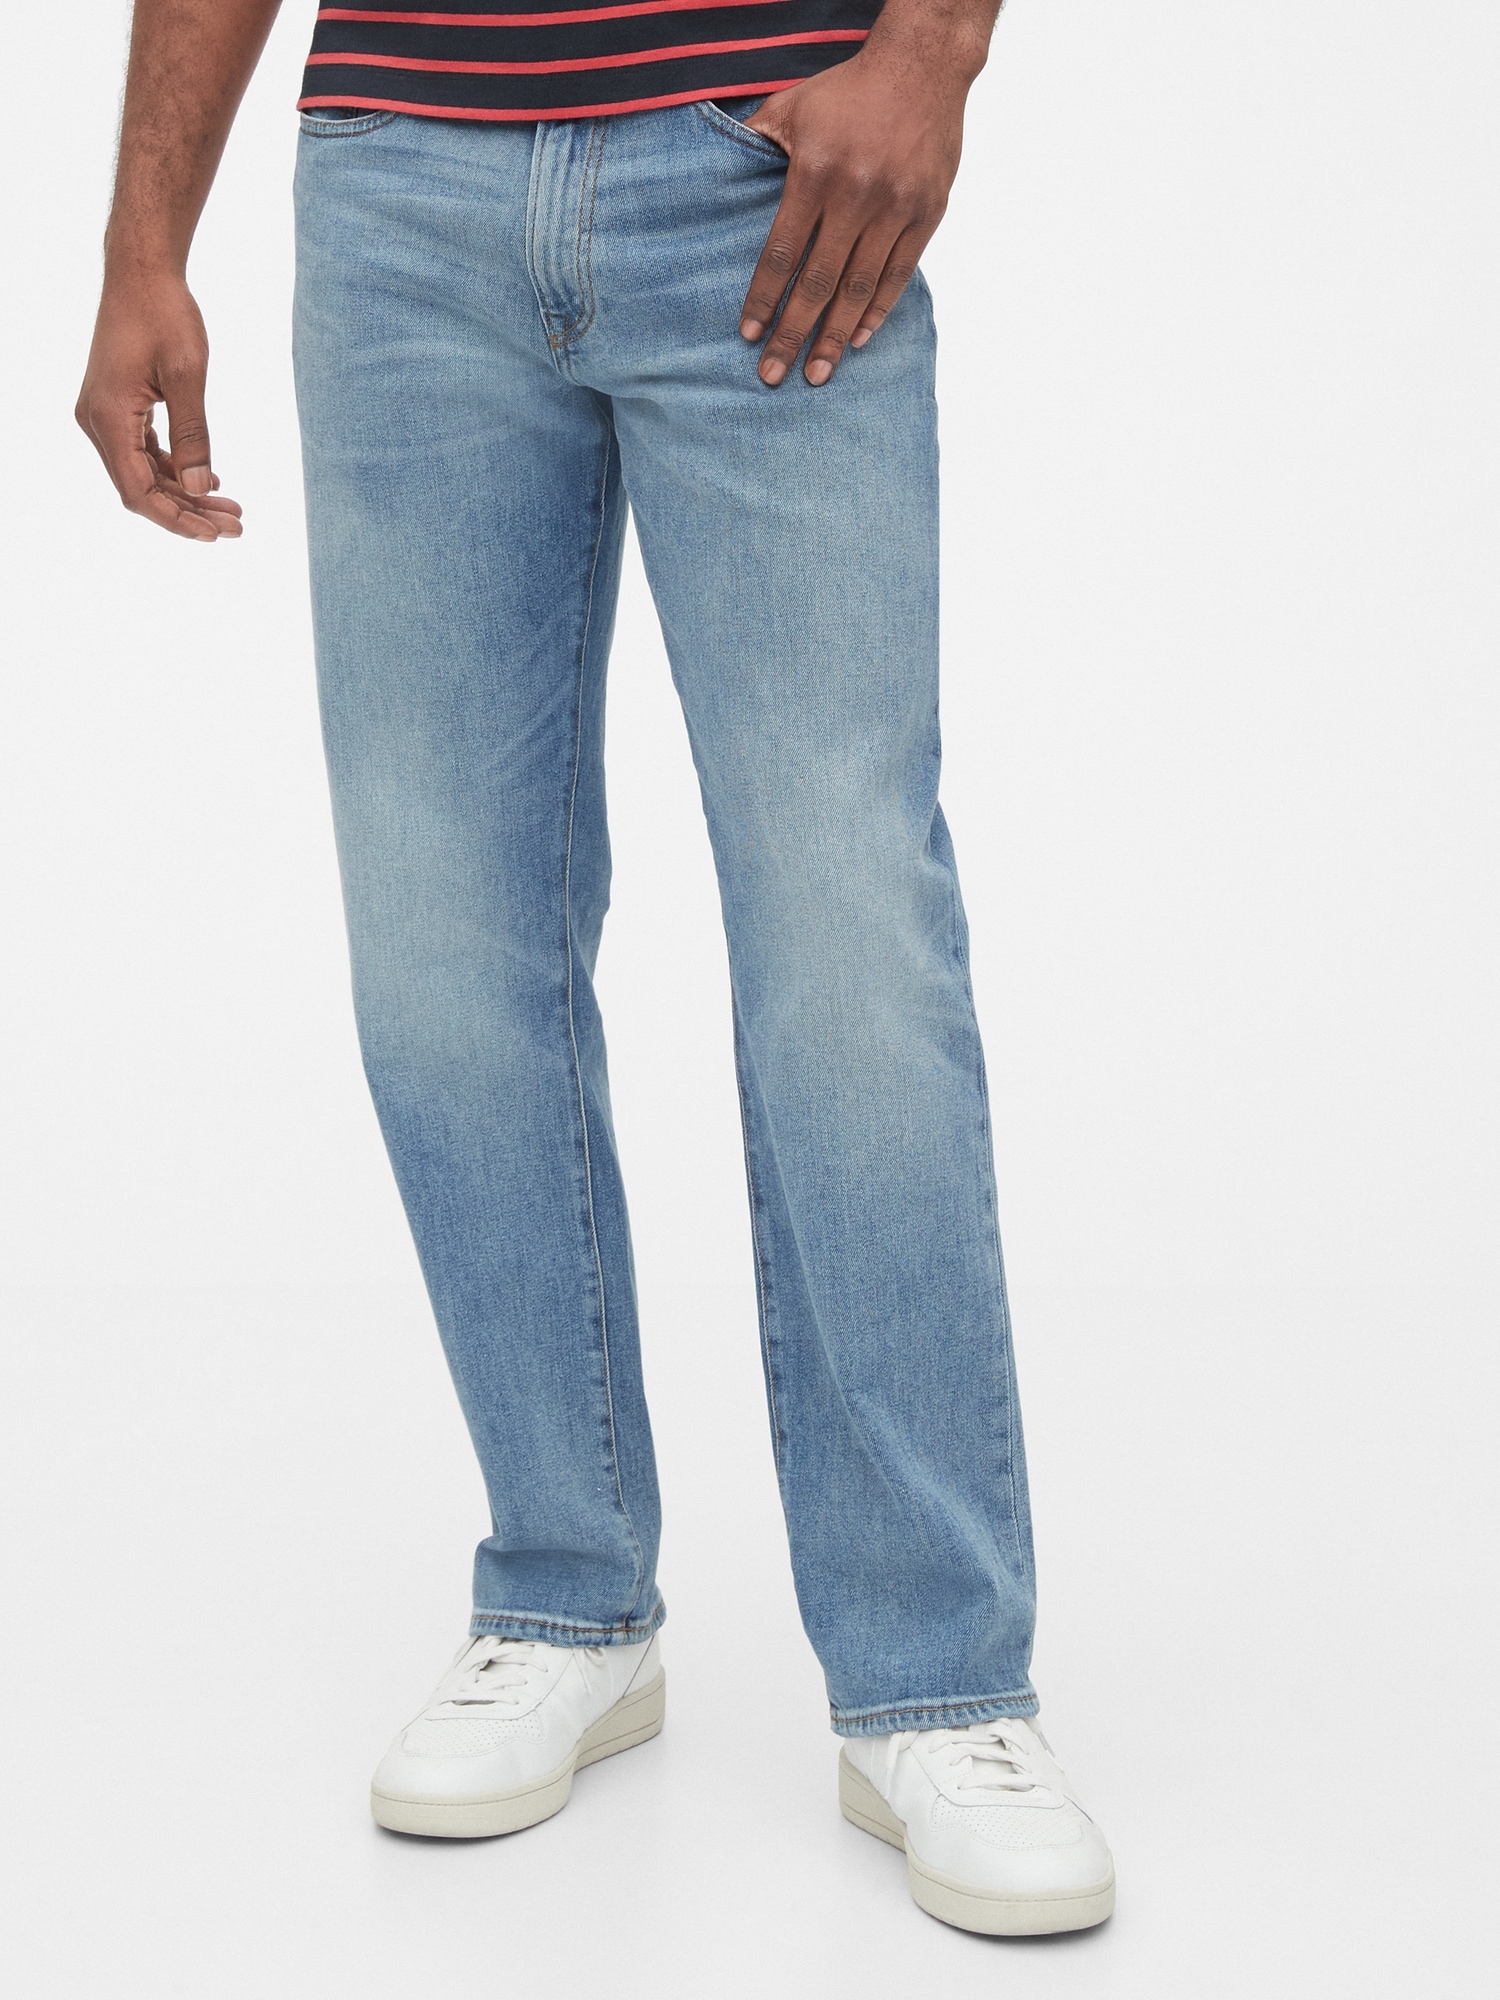 GAP Men's Classic Everyday Straight Denim Jeans in GapFlex with Washwell